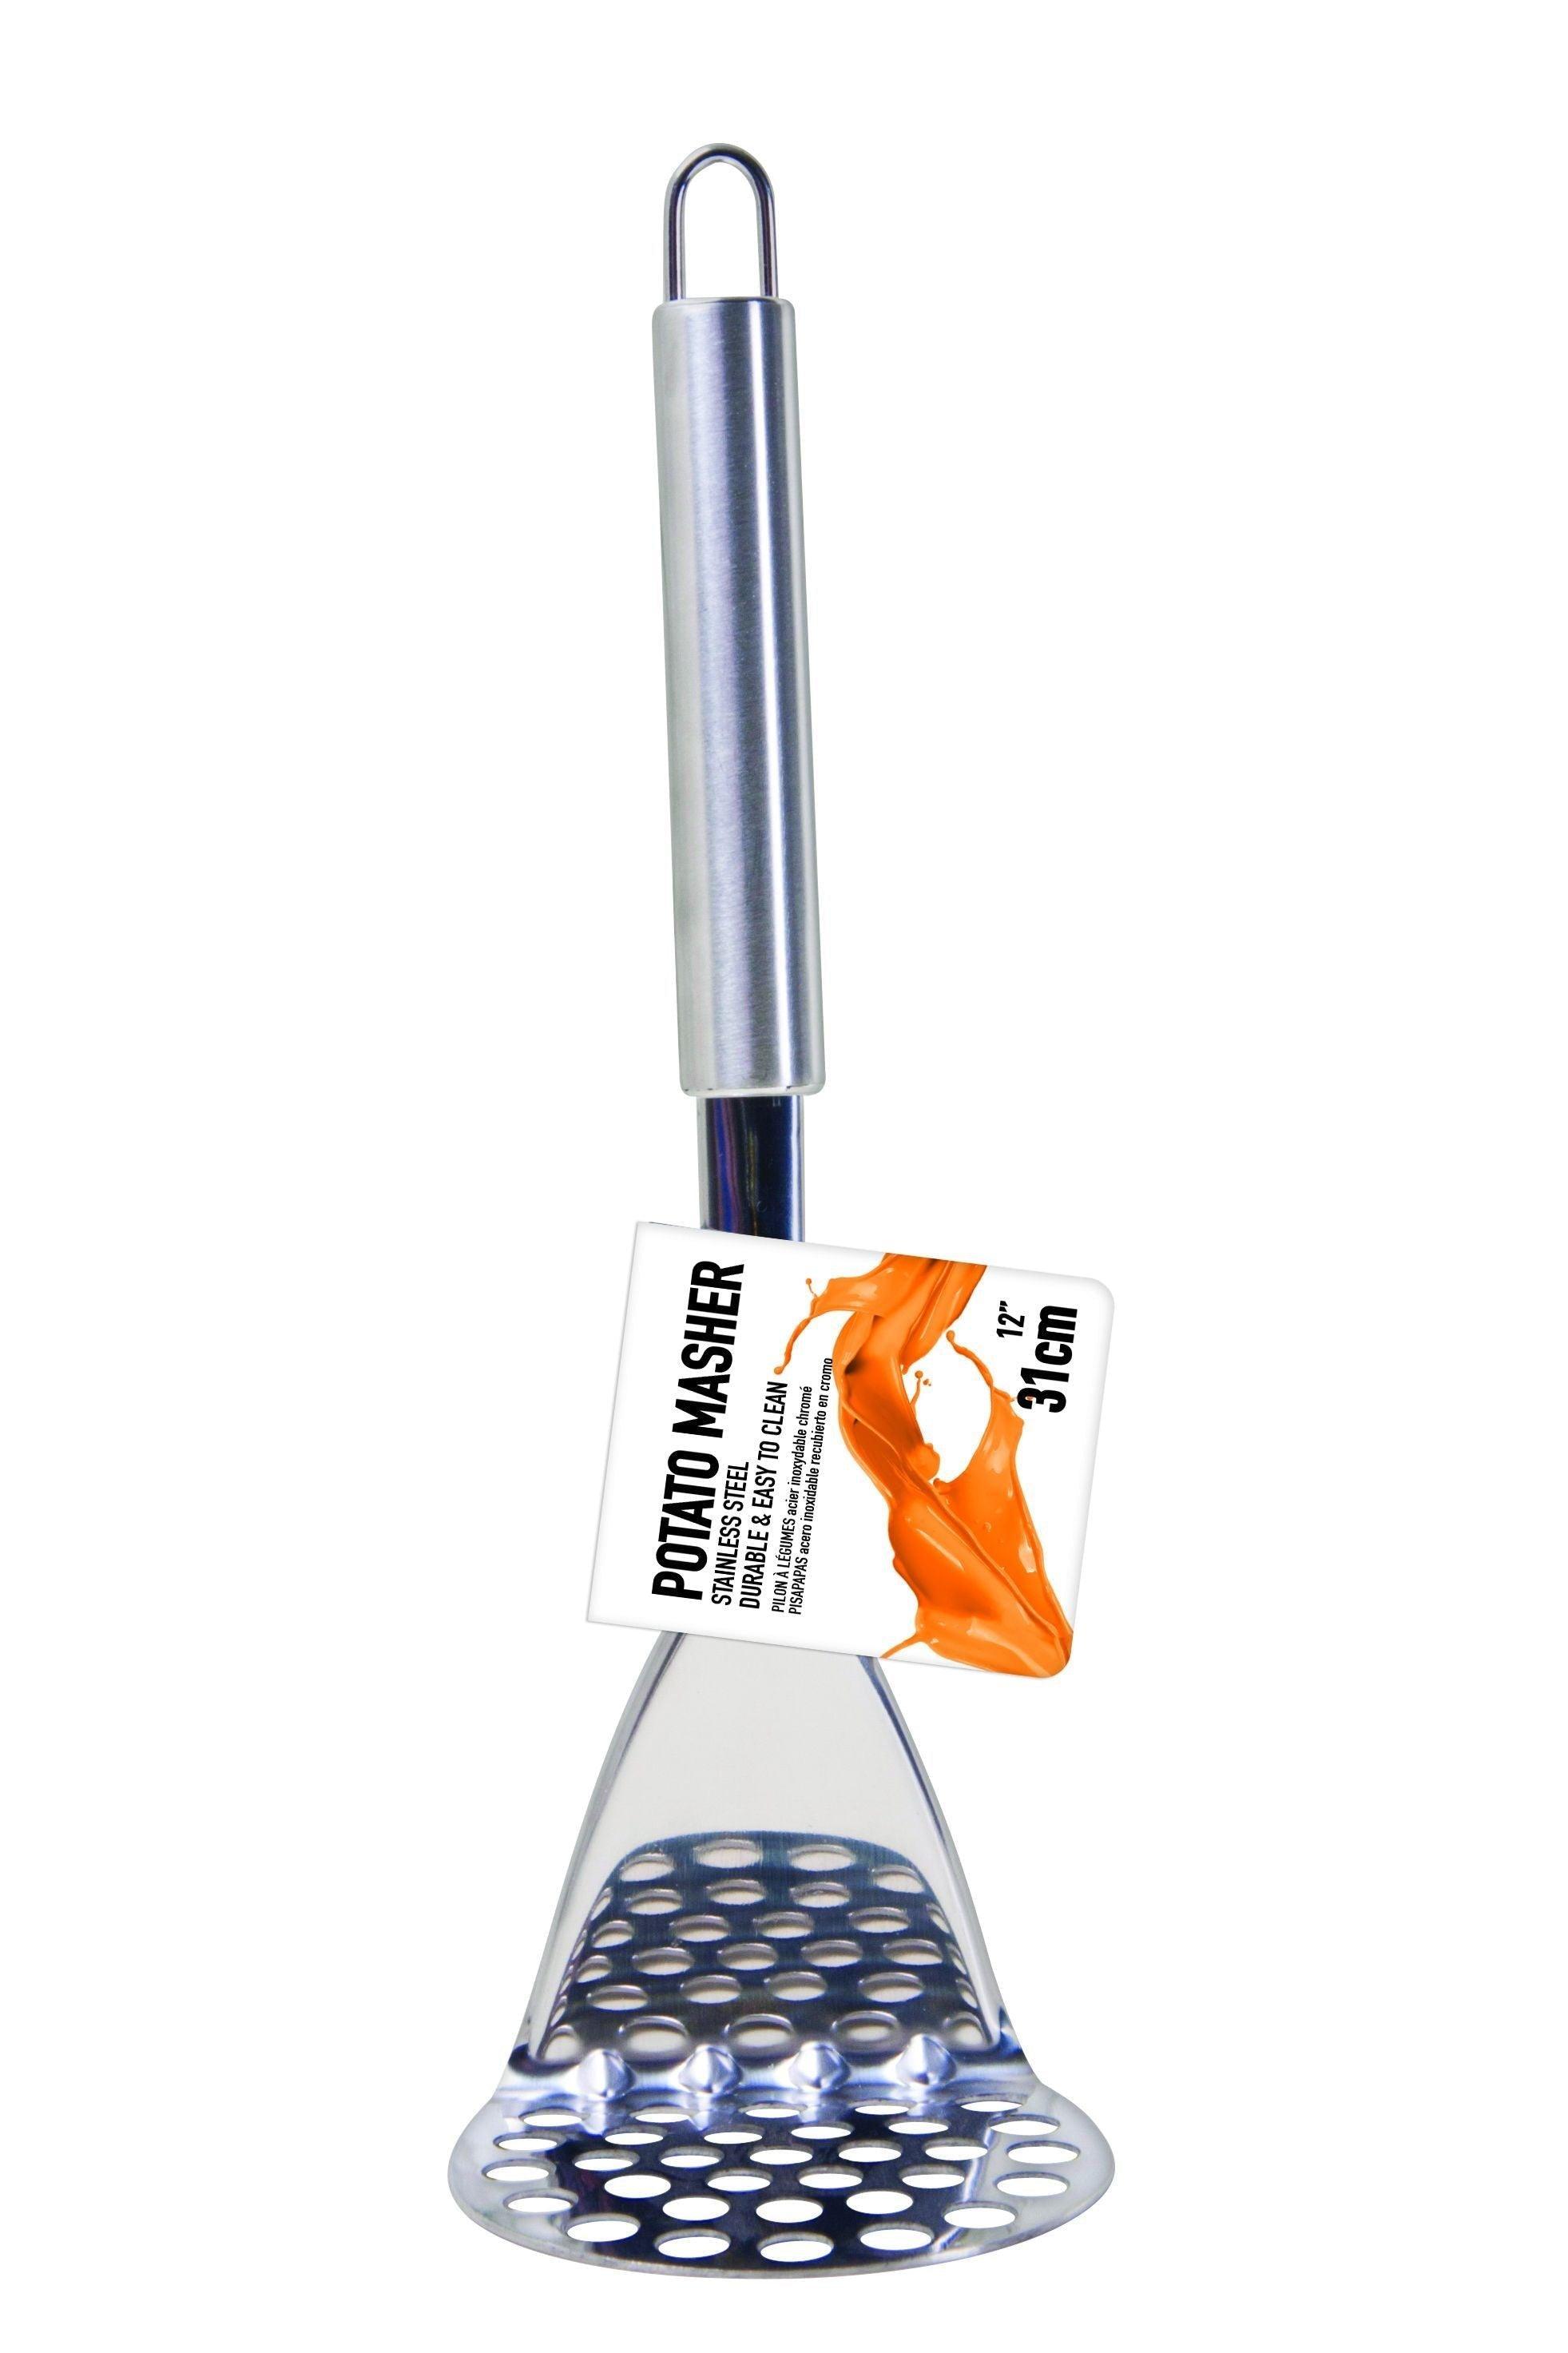 Potato Masher | Stainless Steel | Durable & Easy To Clean | 31cm - Choice Stores